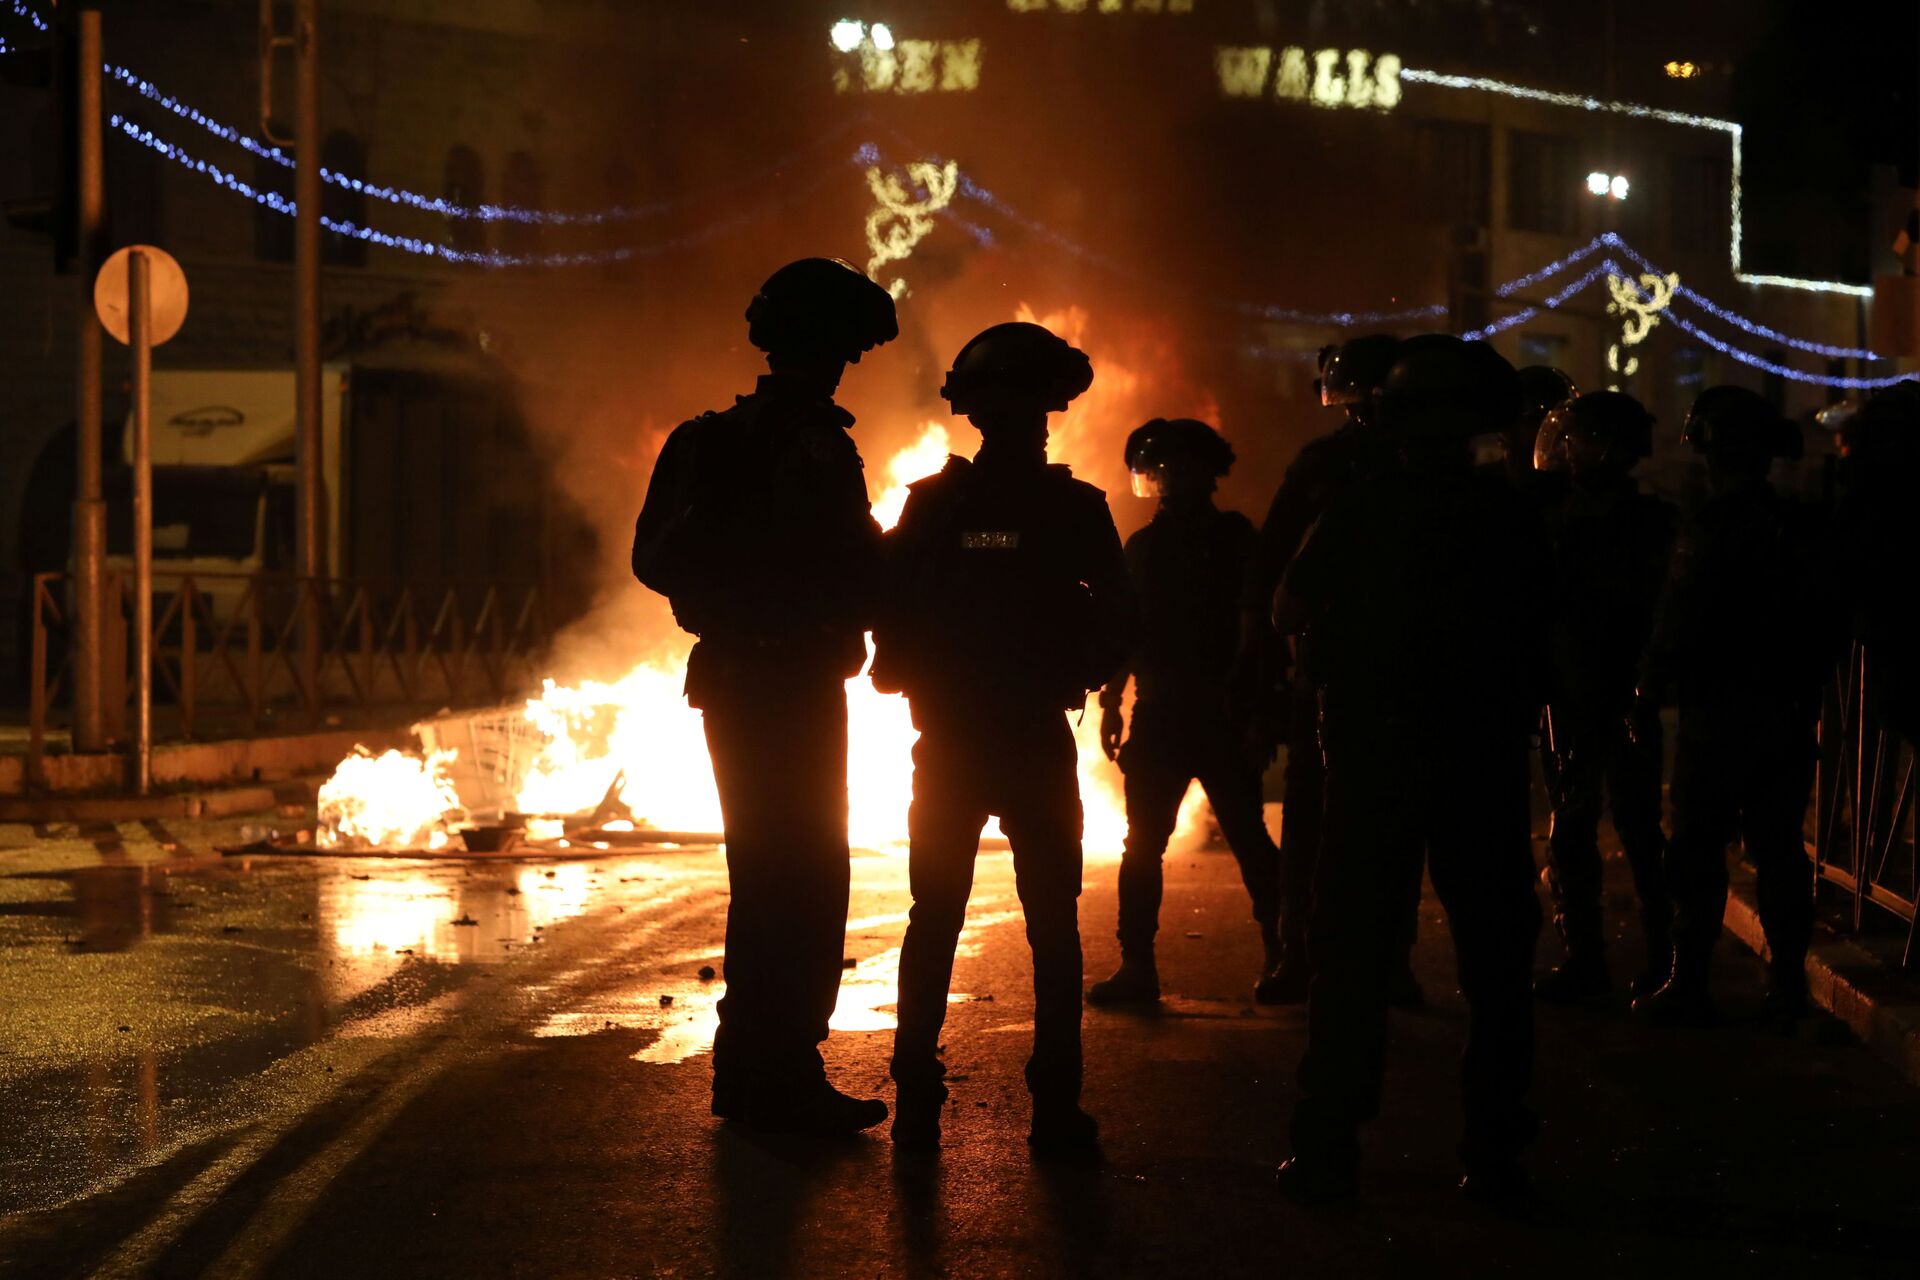 Israeli police officers stand next to a burning barricade during clashes, as the Muslim holy fasting month of Ramadan continues, in Jerusalem, April 22, 2021 - Sputnik International, 1920, 10.11.2021